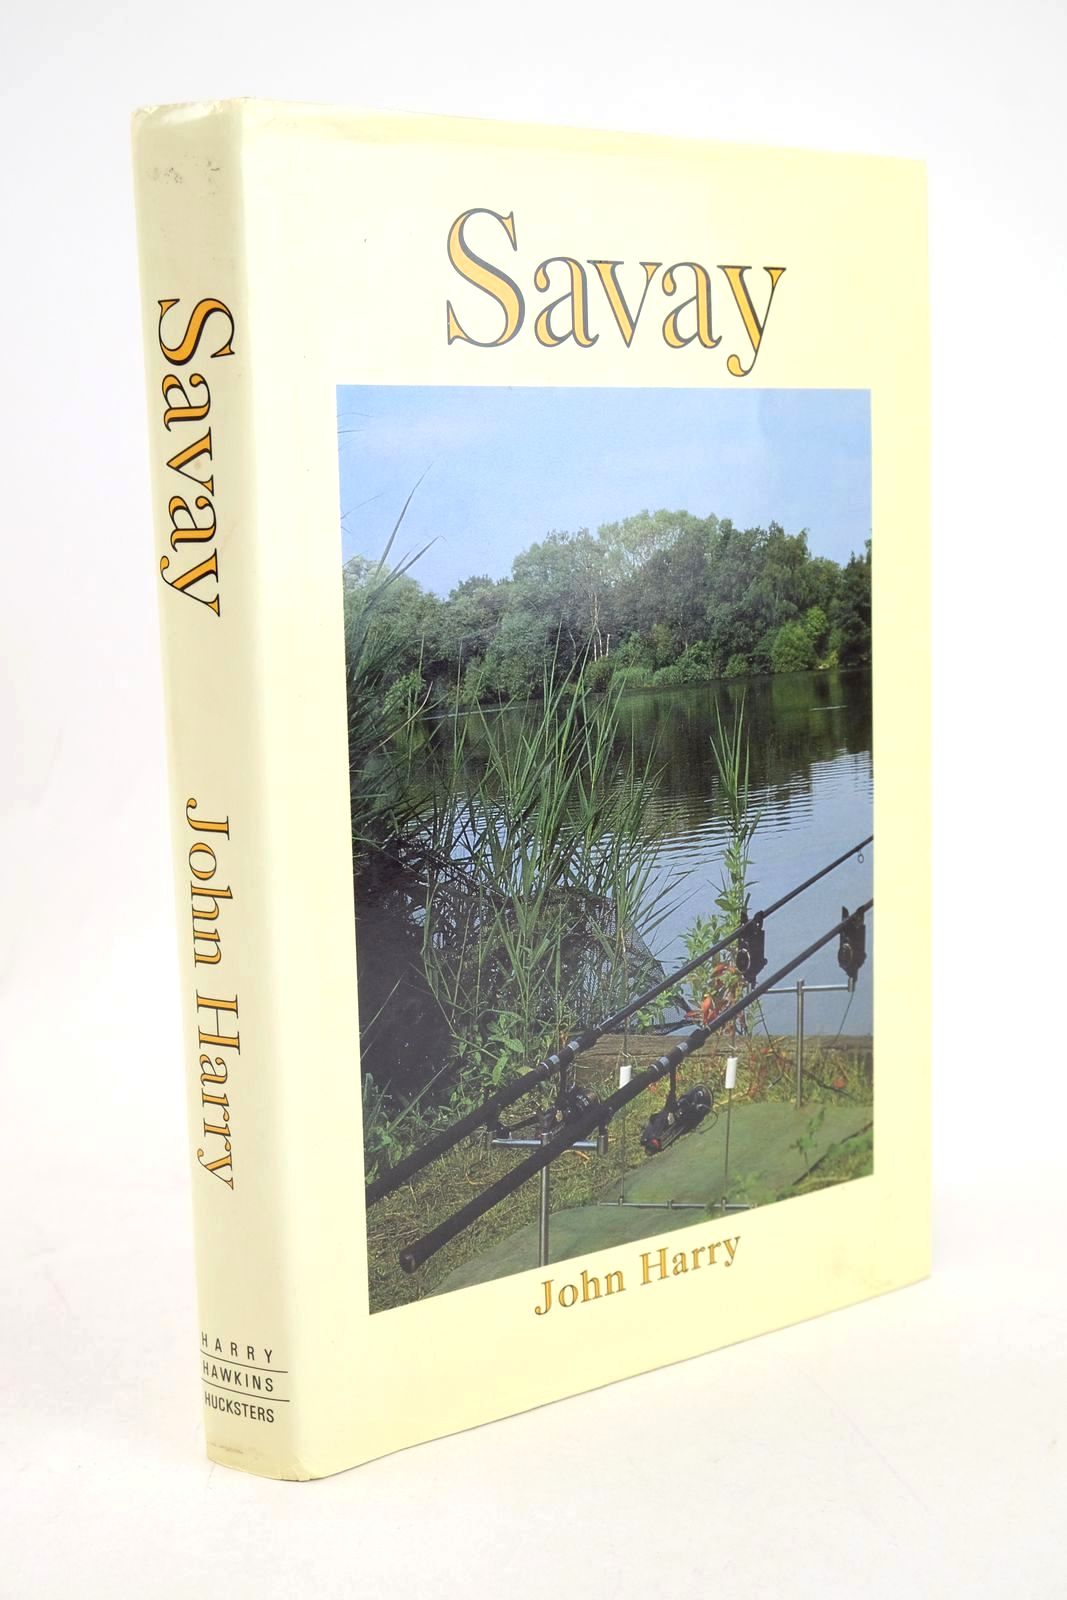 Photo of SAVAY written by Harry, John published by Harry Hawkins Hucksters Ltd (STOCK CODE: 1327608)  for sale by Stella & Rose's Books